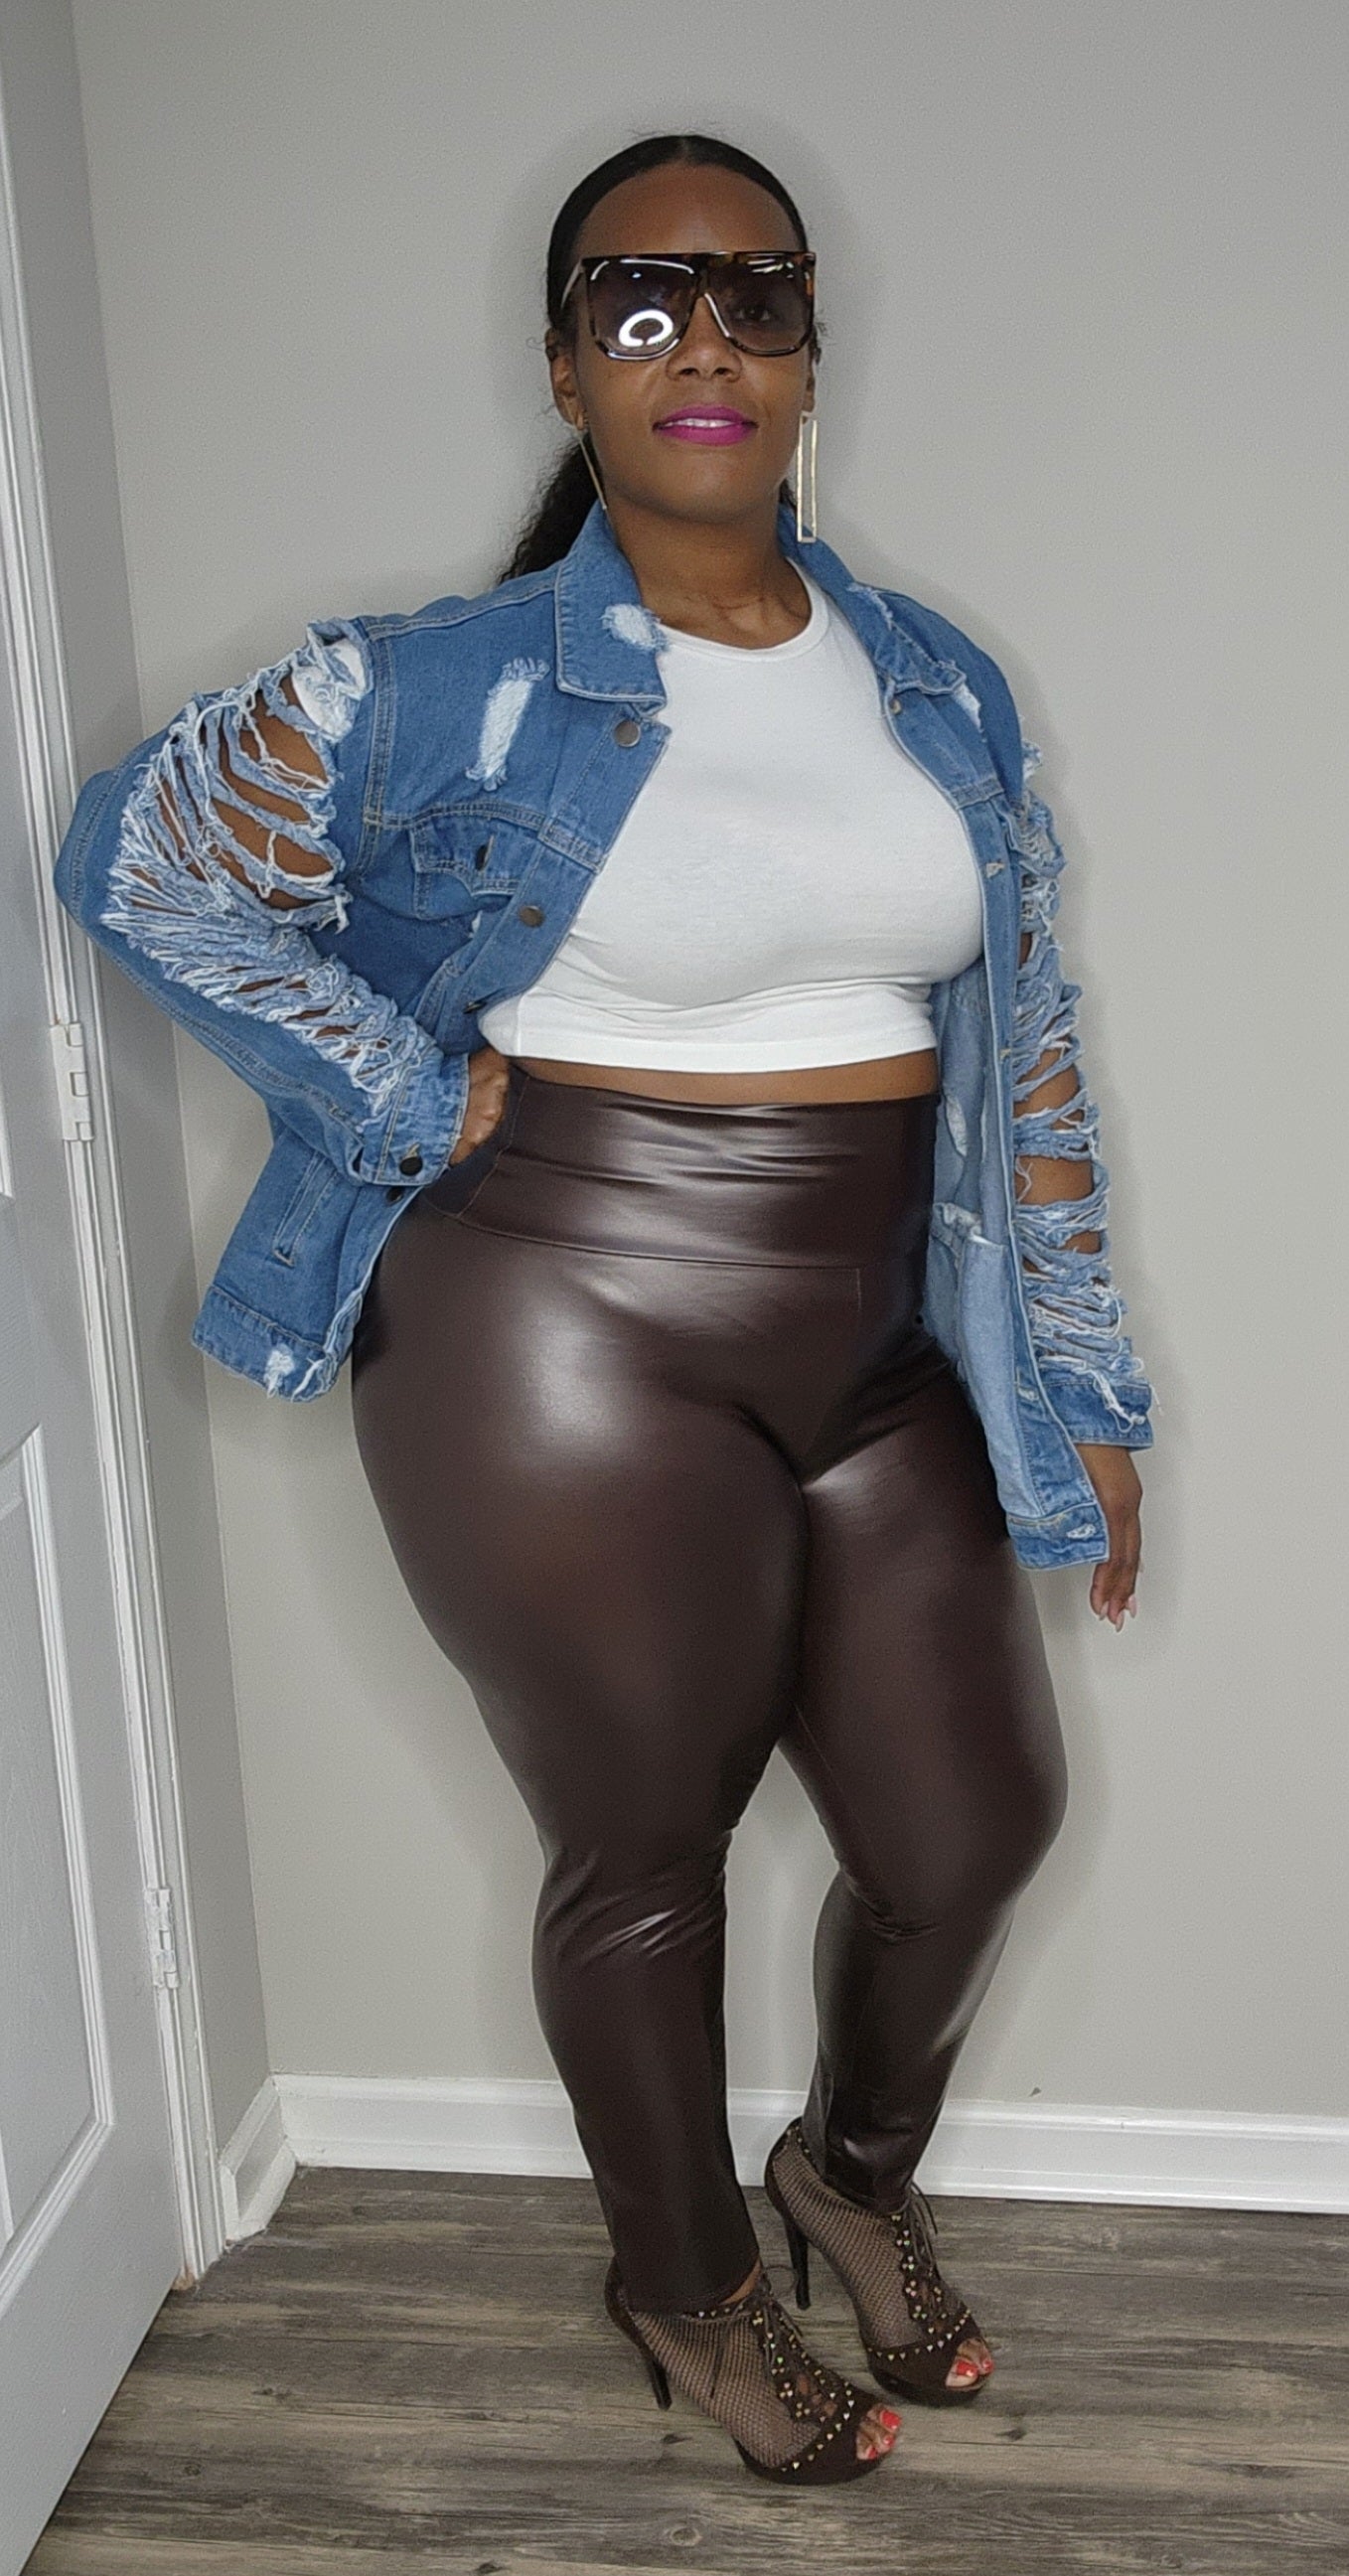 Chocolate Faux Leather Leggings, Trousers